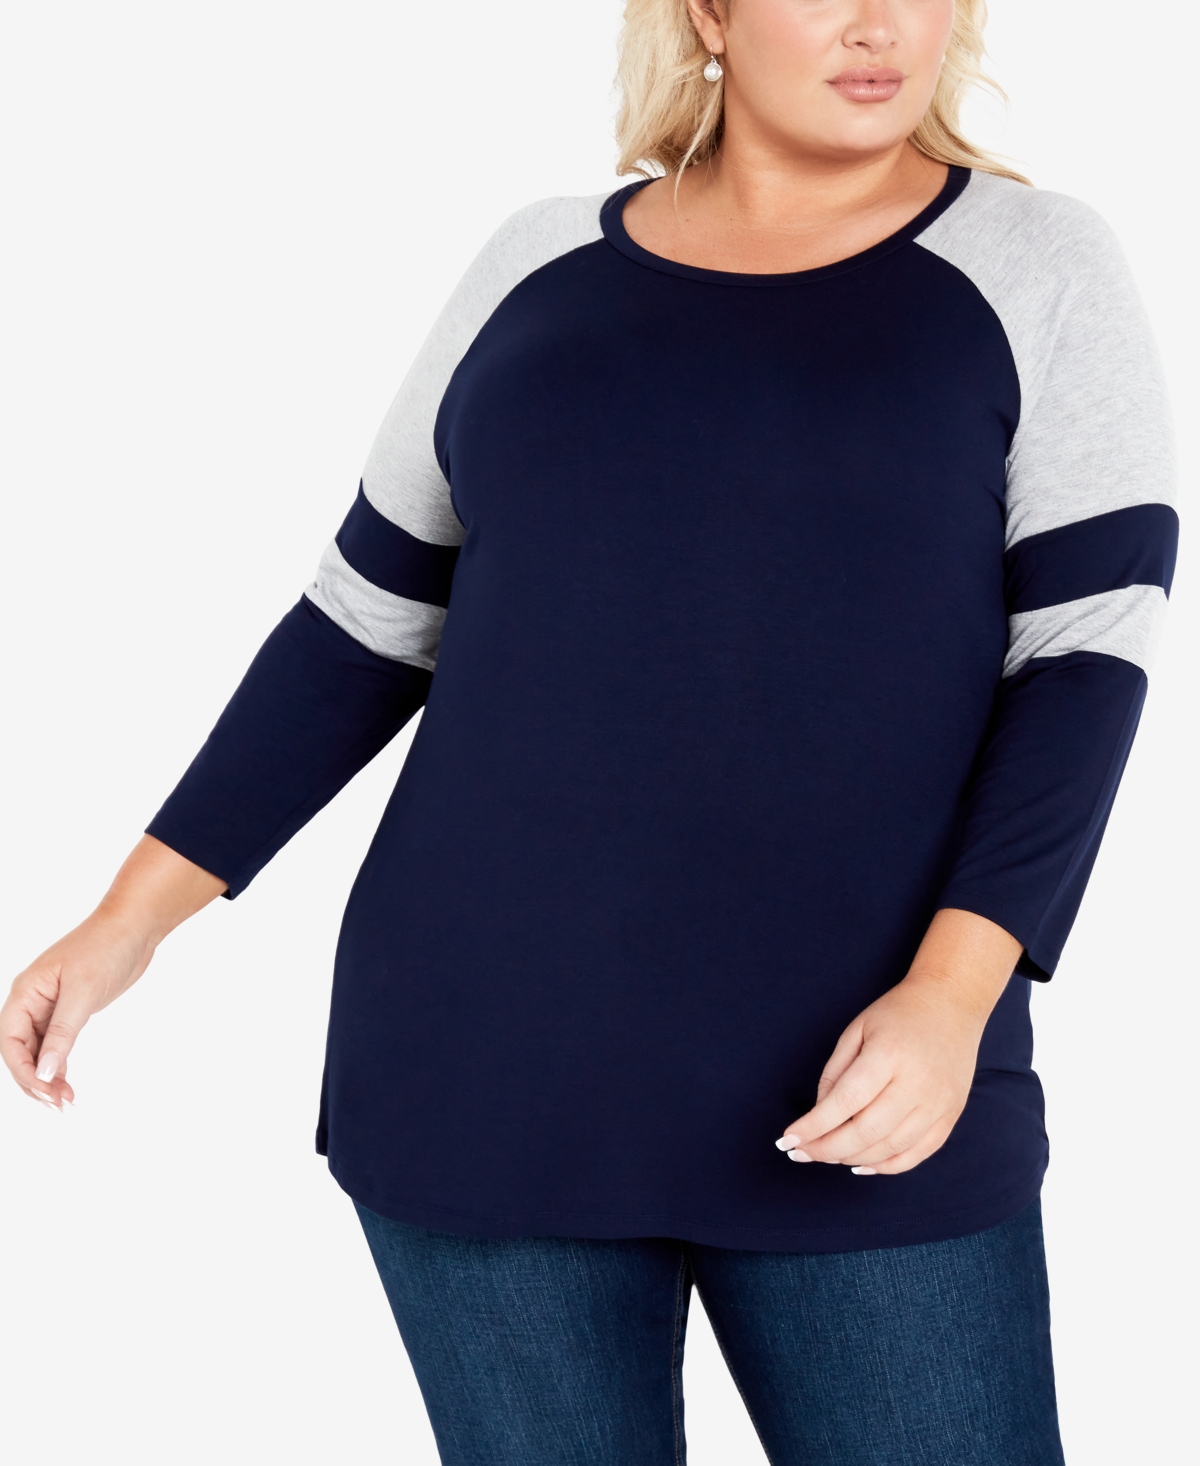 Avenue Plus Size Splice Sleeve Color Top In Navy,gray Marle